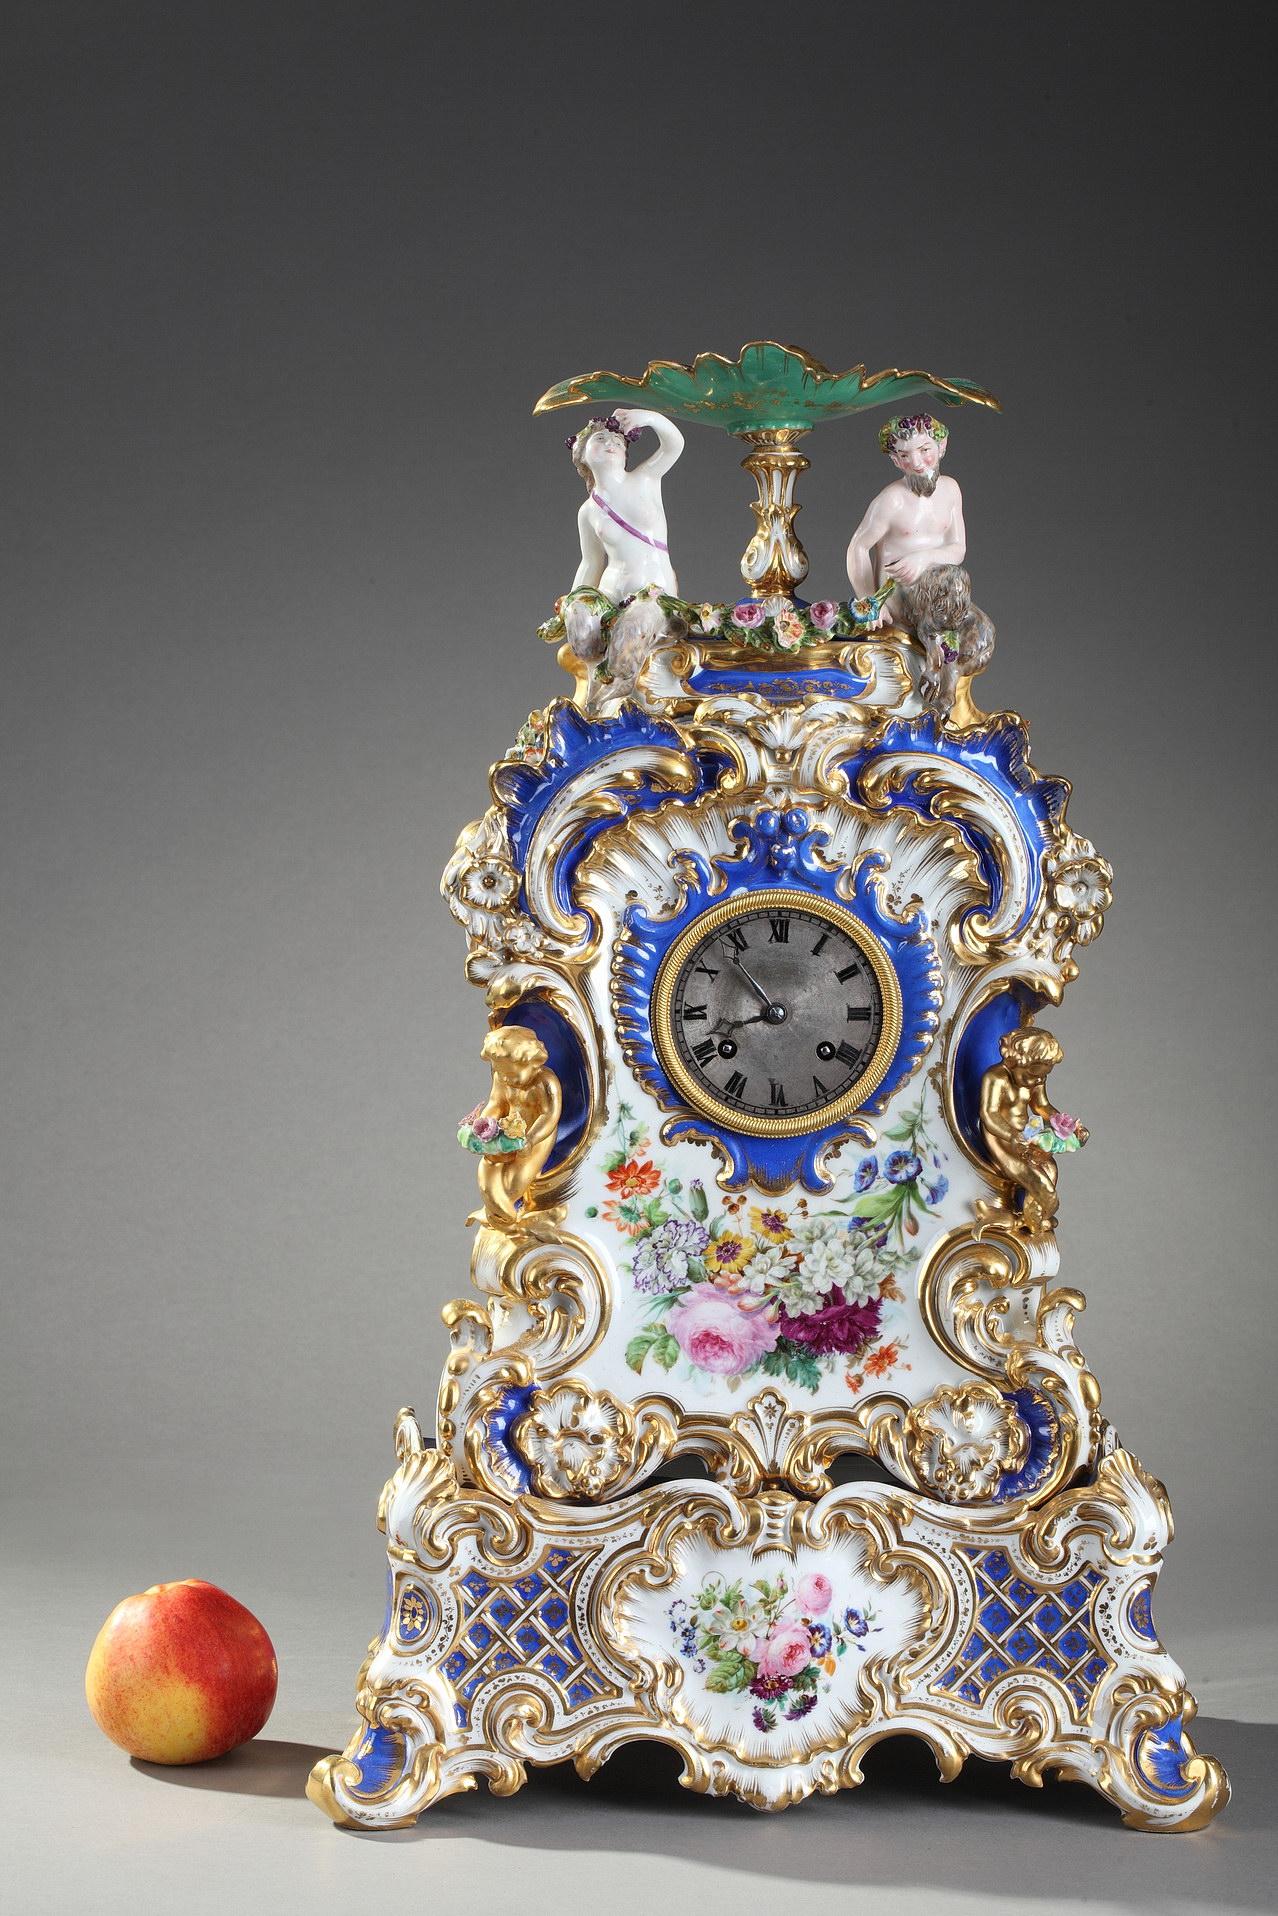 Polychrome fine porcelain clock surmounted by a bacchante and a faun sitting under a cup and holding a garland of flowers. Shimmering decoration of bouquets of flowers, scrolls and foliage on a blue and white background with gold highlights. Two